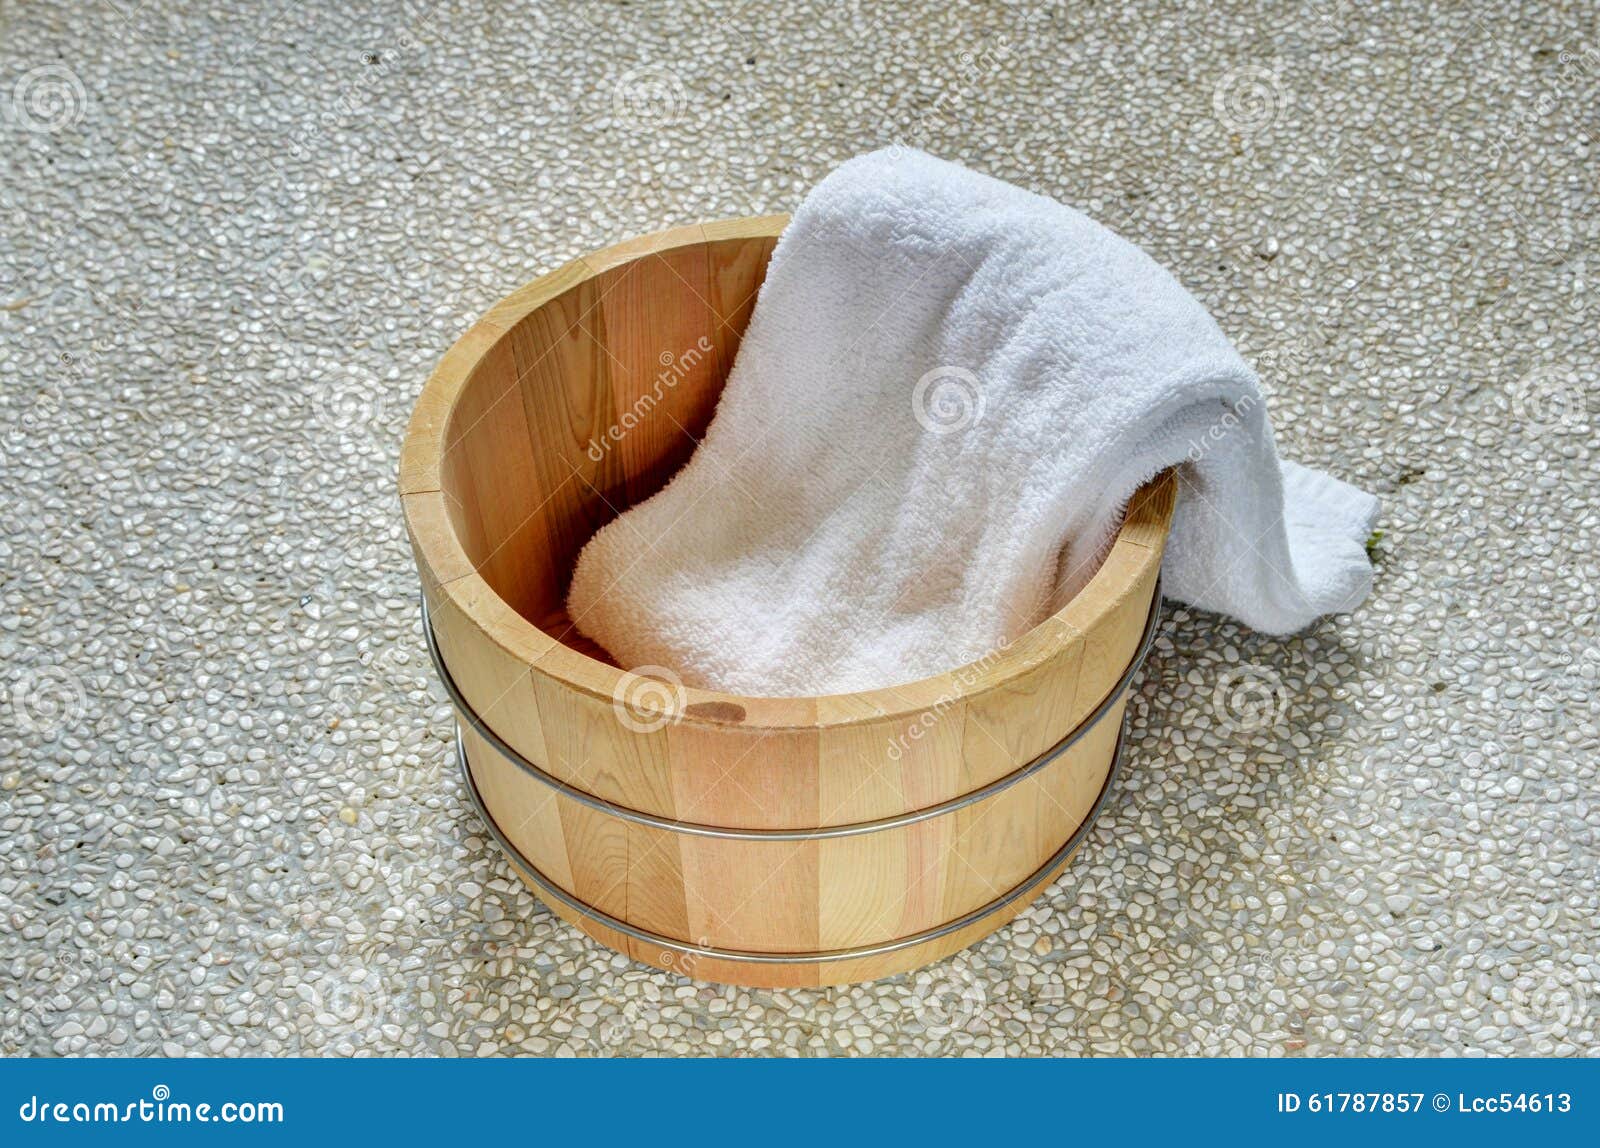 Bath bucket with a towel stock image. Image of wash, lave - 61787857